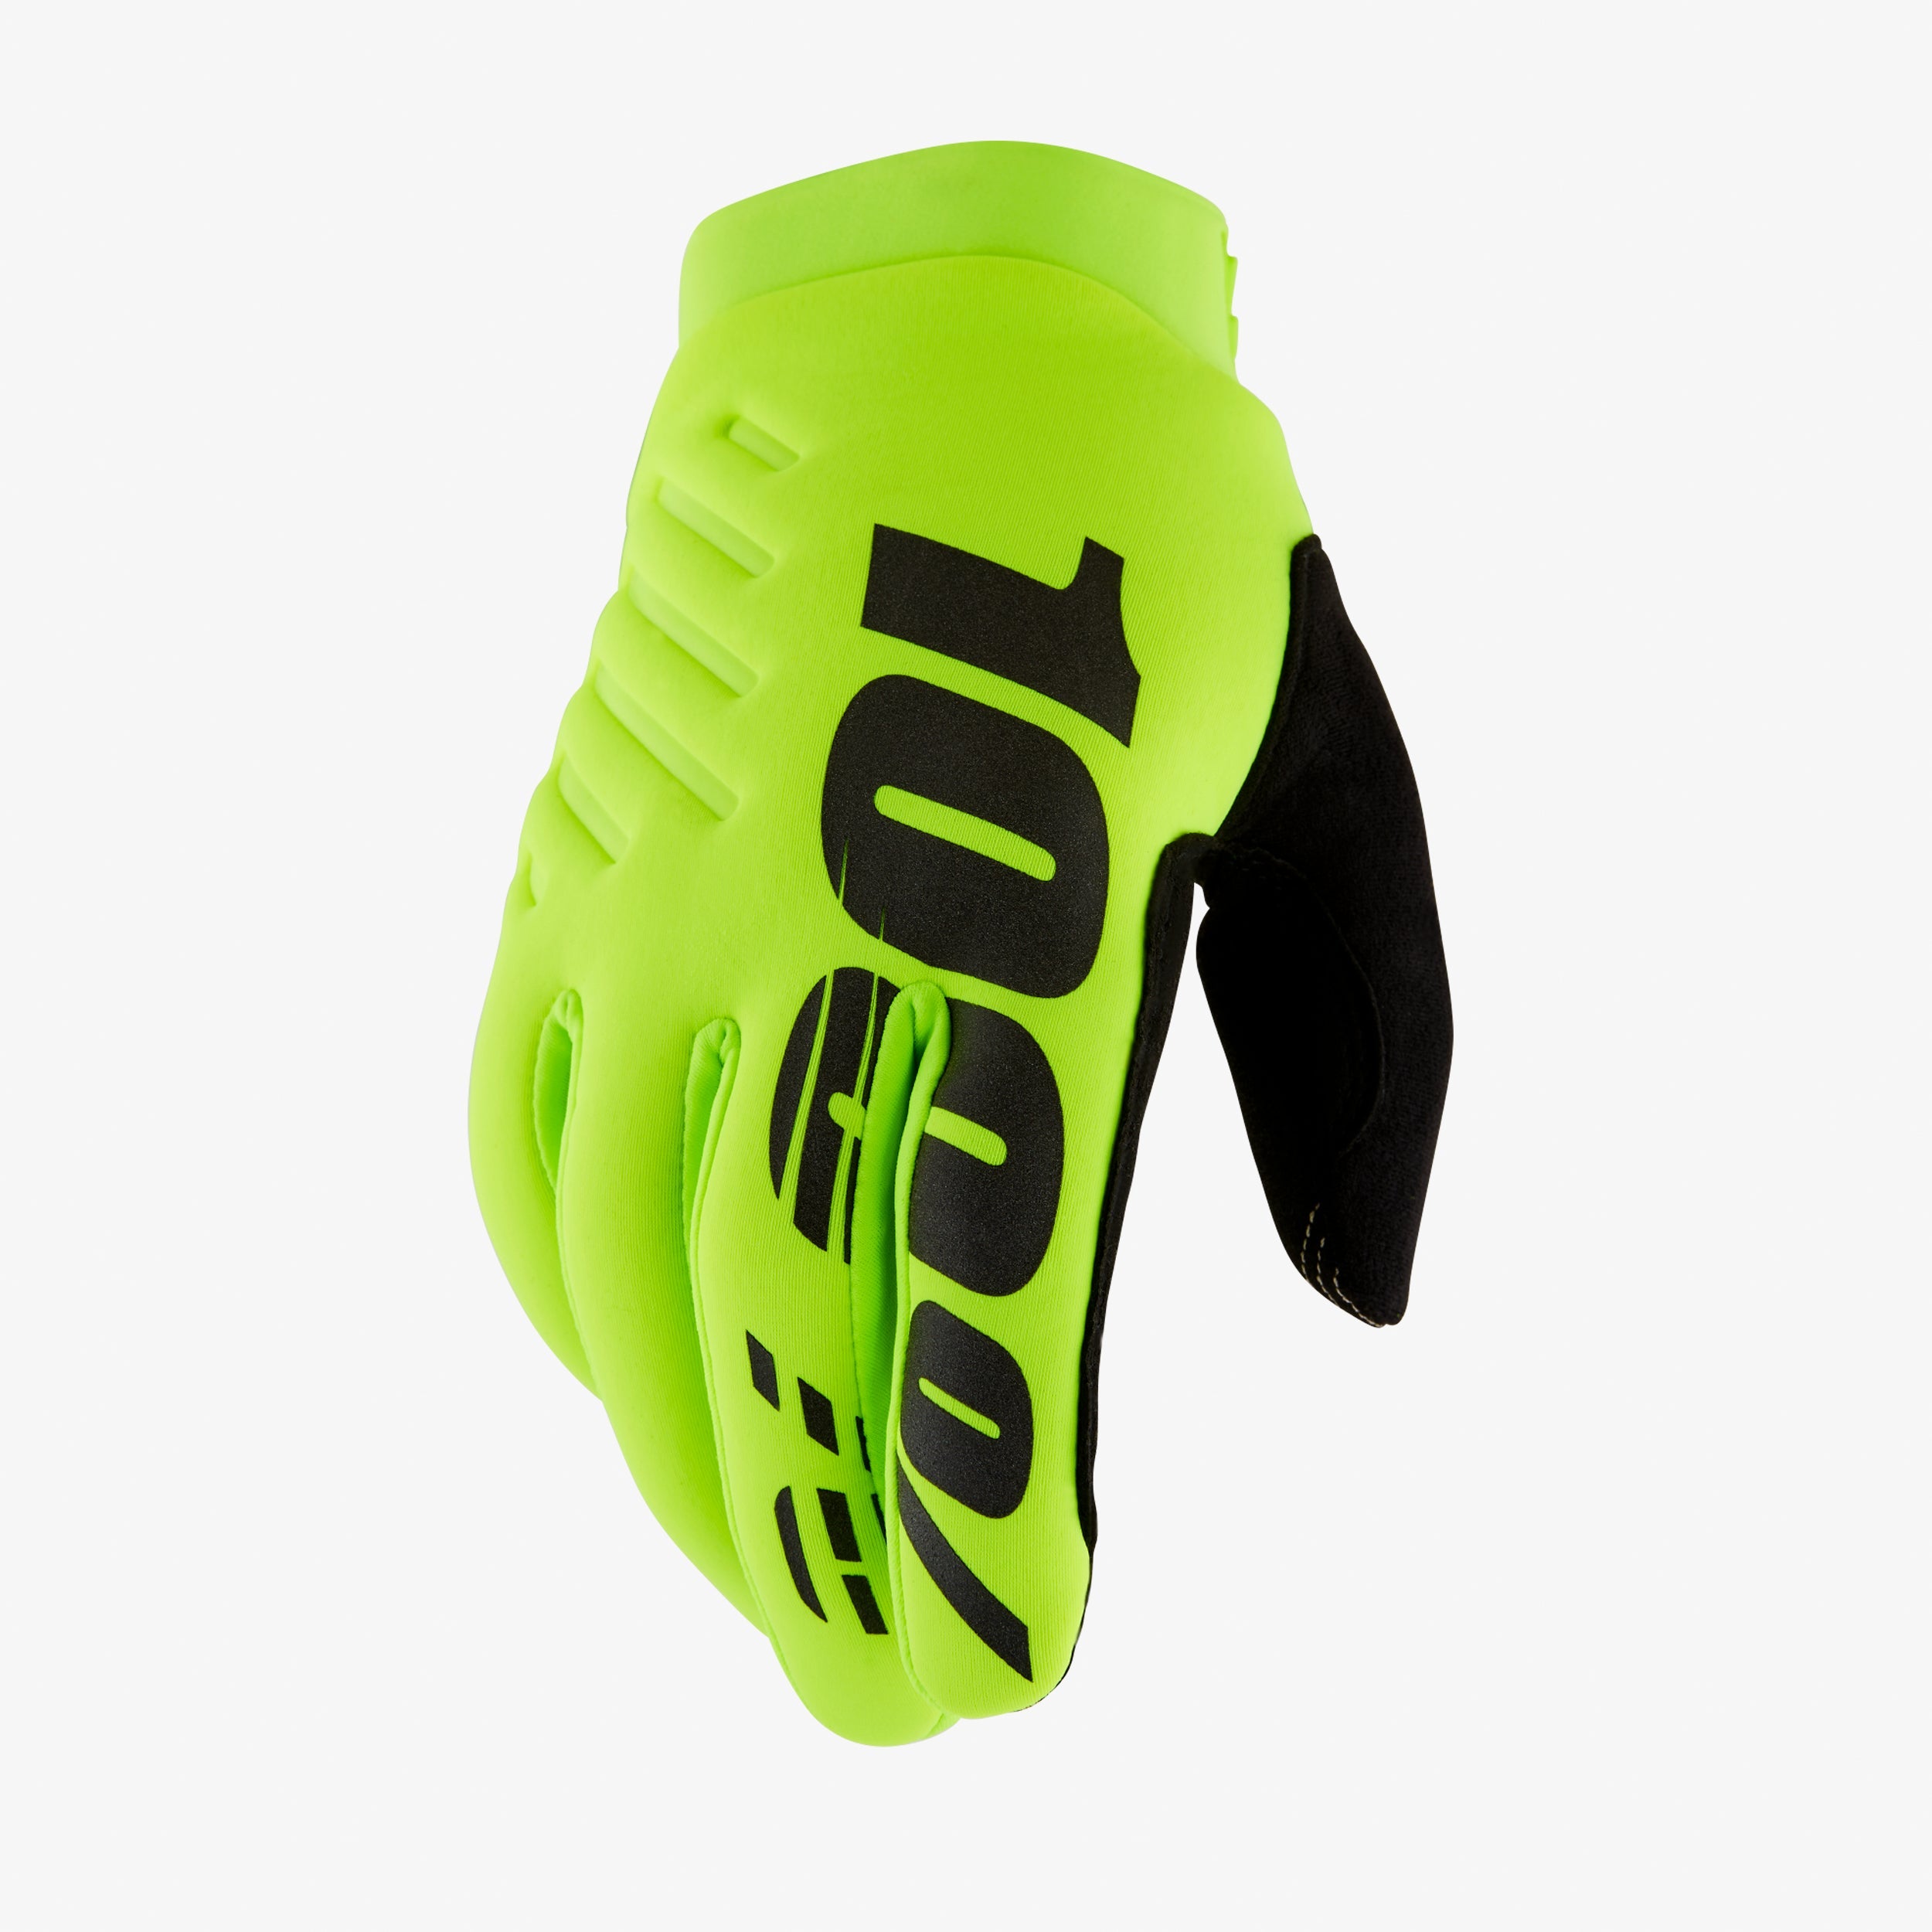 BRISKER Youth Gloves Fluo Yellow/Black